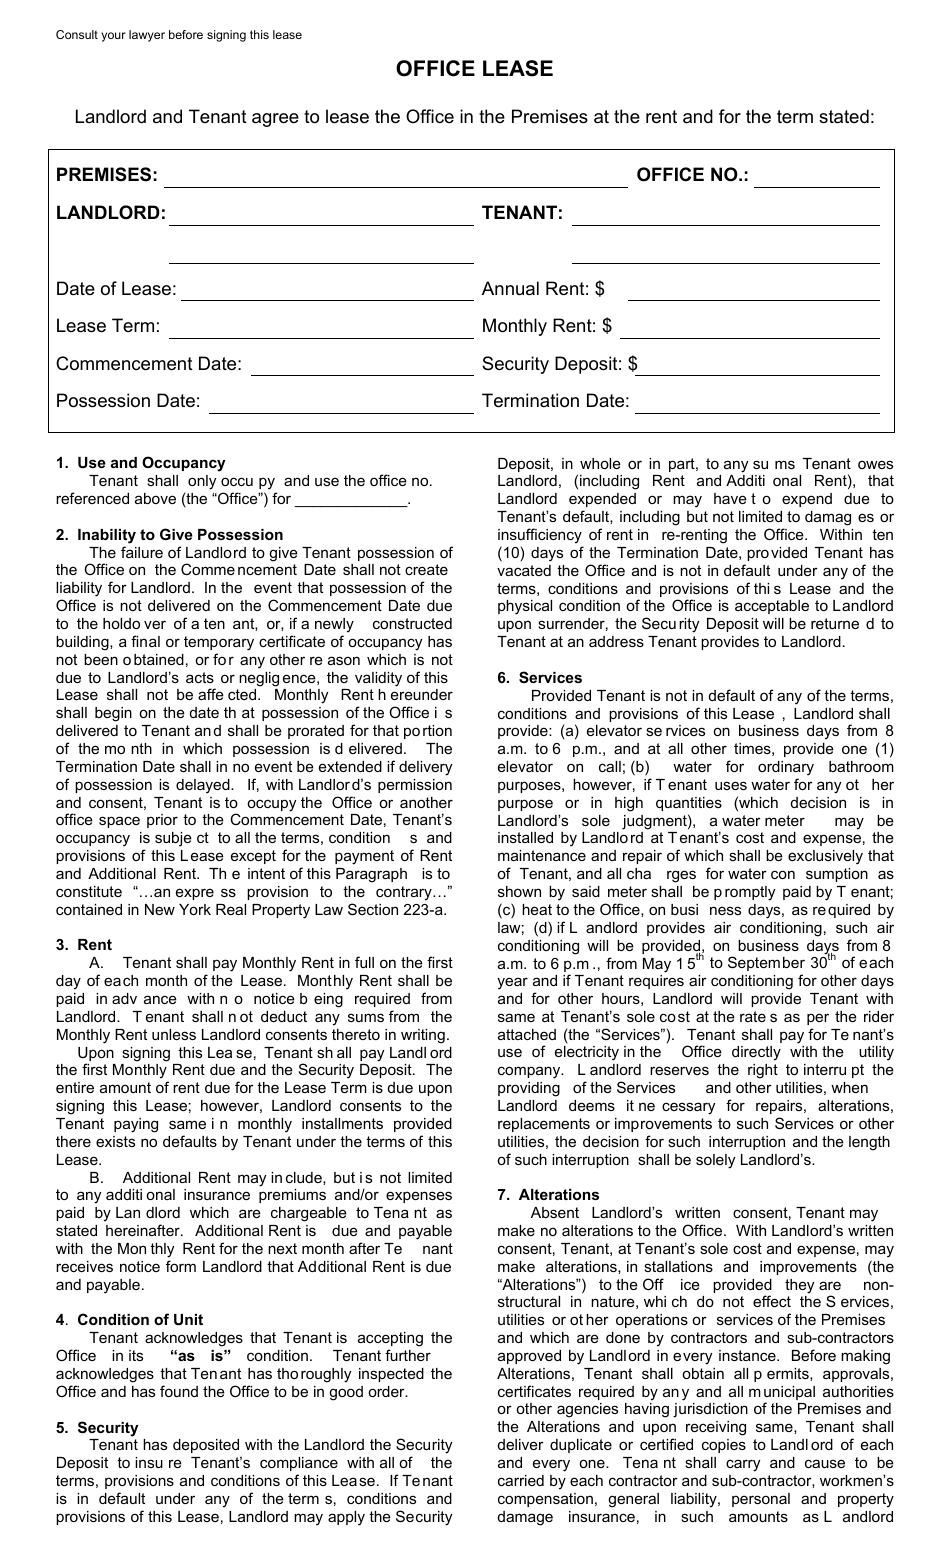 Office Lease Agreement Template - New York, Page 1